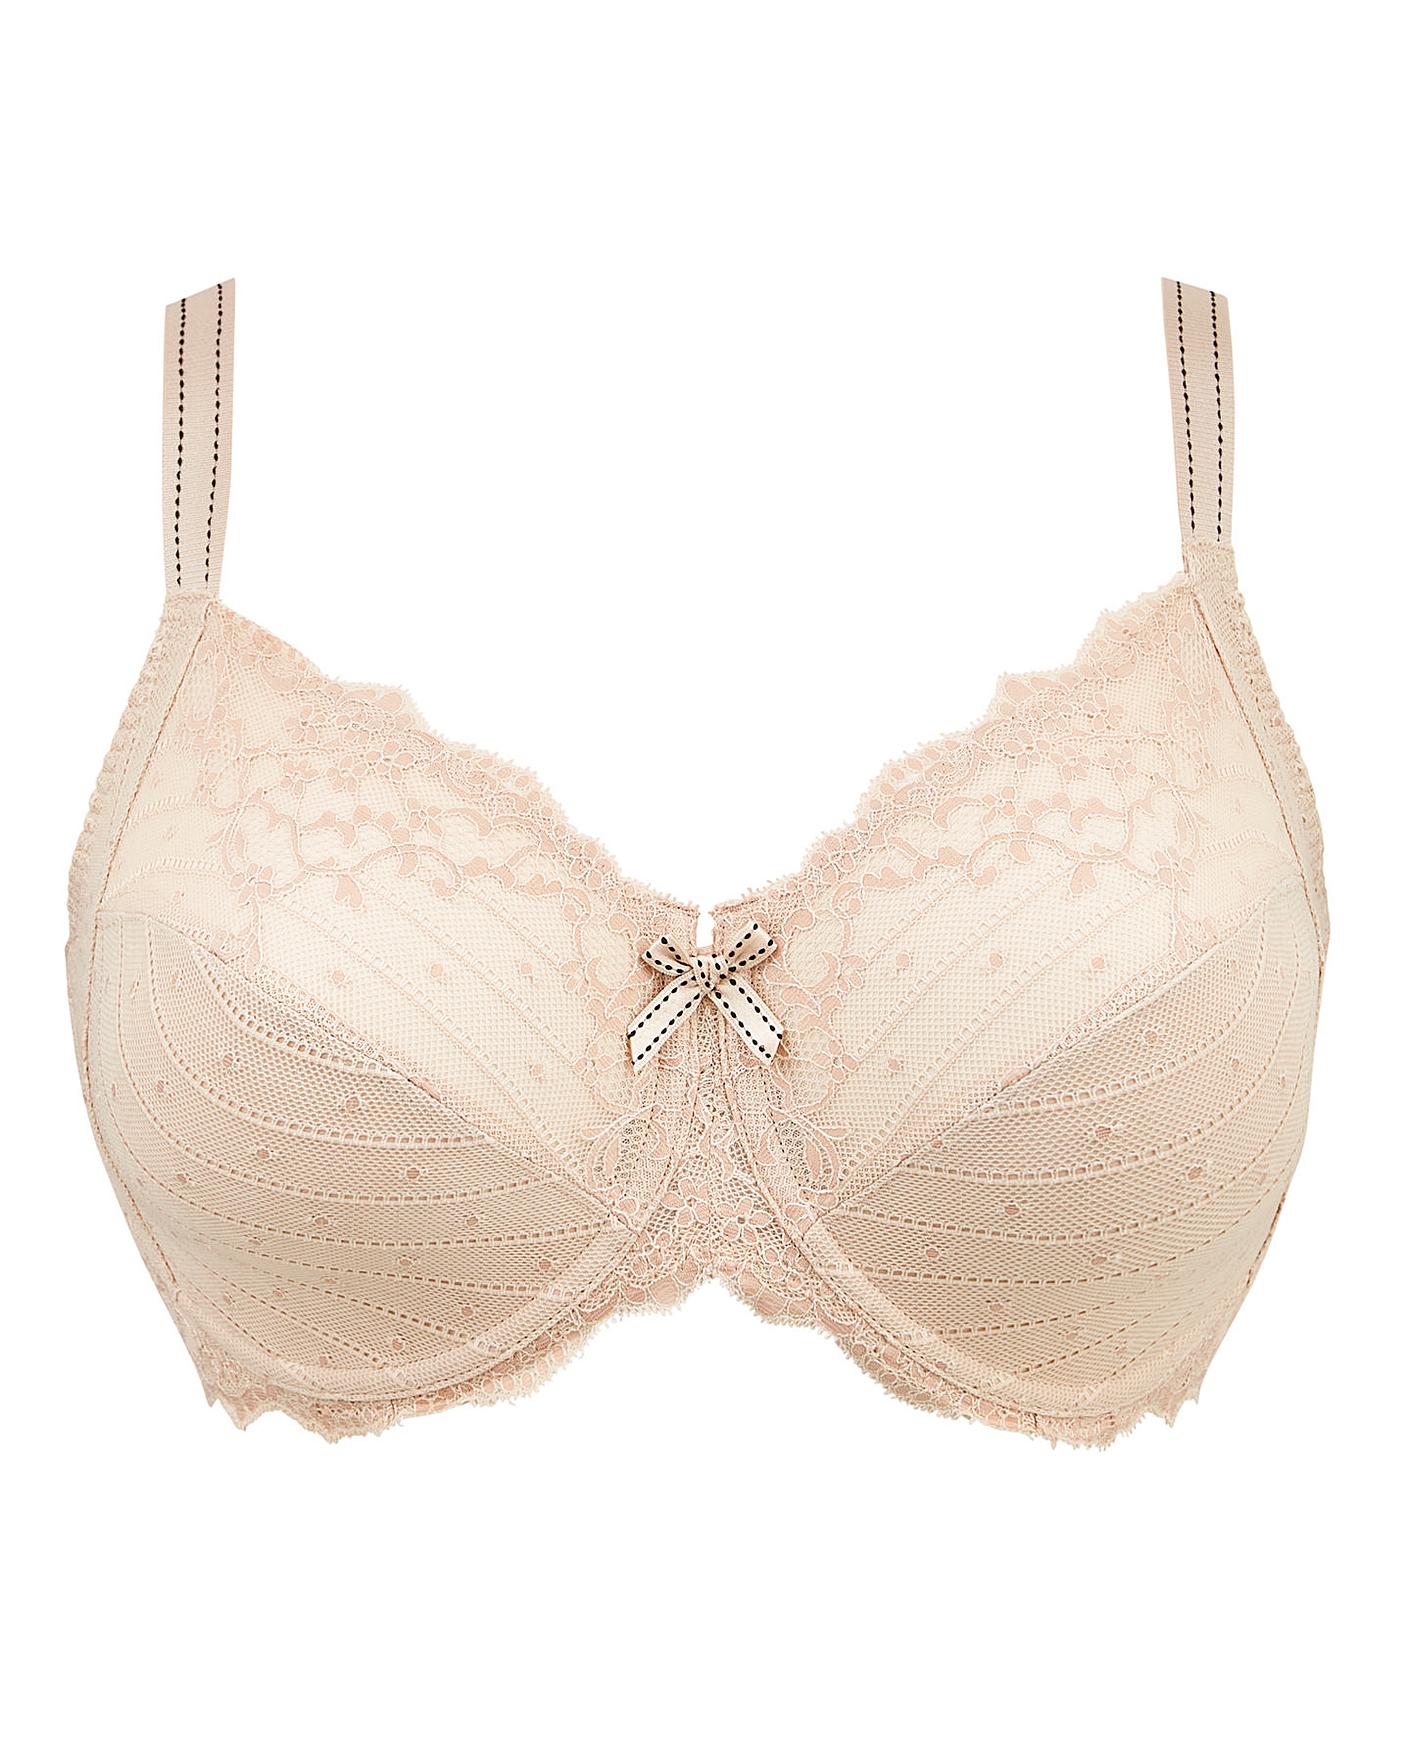 Chantelle Rive Gauche Full Cup Wired Bra